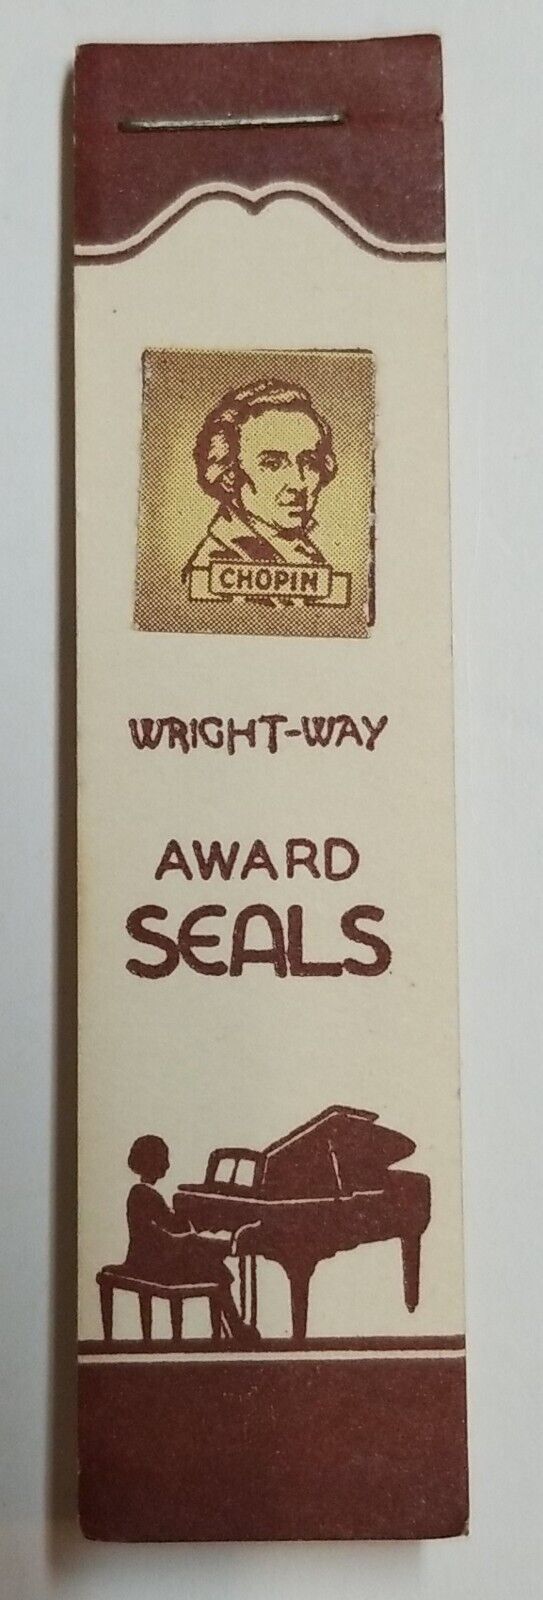 VINTAGE WRIGHT-WAY MUSIC TEACHING AWARD SEALS ☆ Frederic Chopin Pianist S-14☆ 